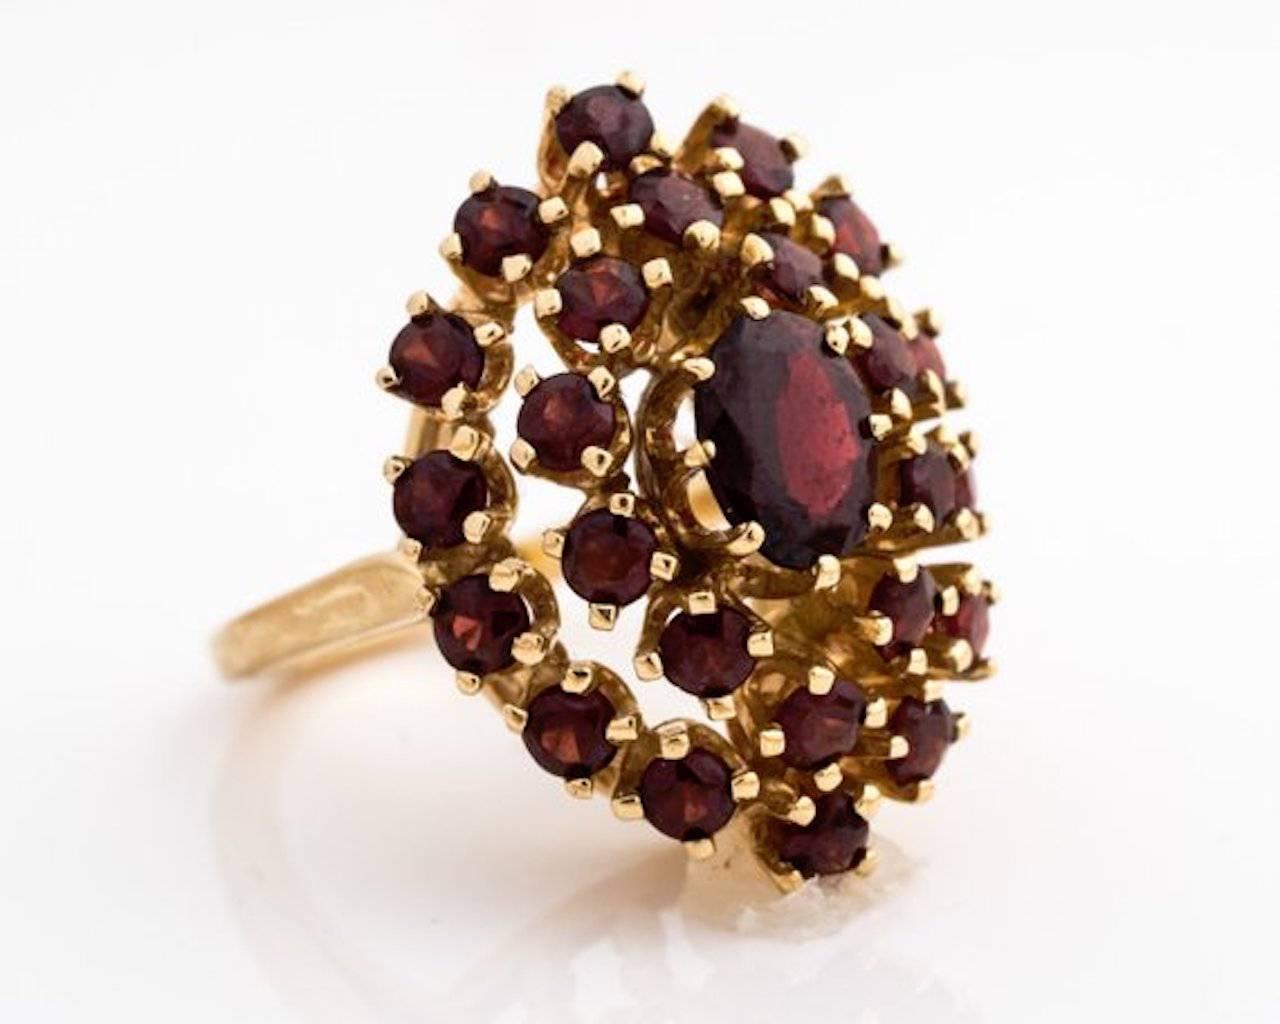 1960s Retro Garnet Cluster Ring -  14k Yellow Gold, Bohemian Garnets

Features an 8- prong set, oval Garnet center stone. Two halos of round garnets surround the center stone. Ten garnets form the inner halo and fourteen garnets form the outer halo.